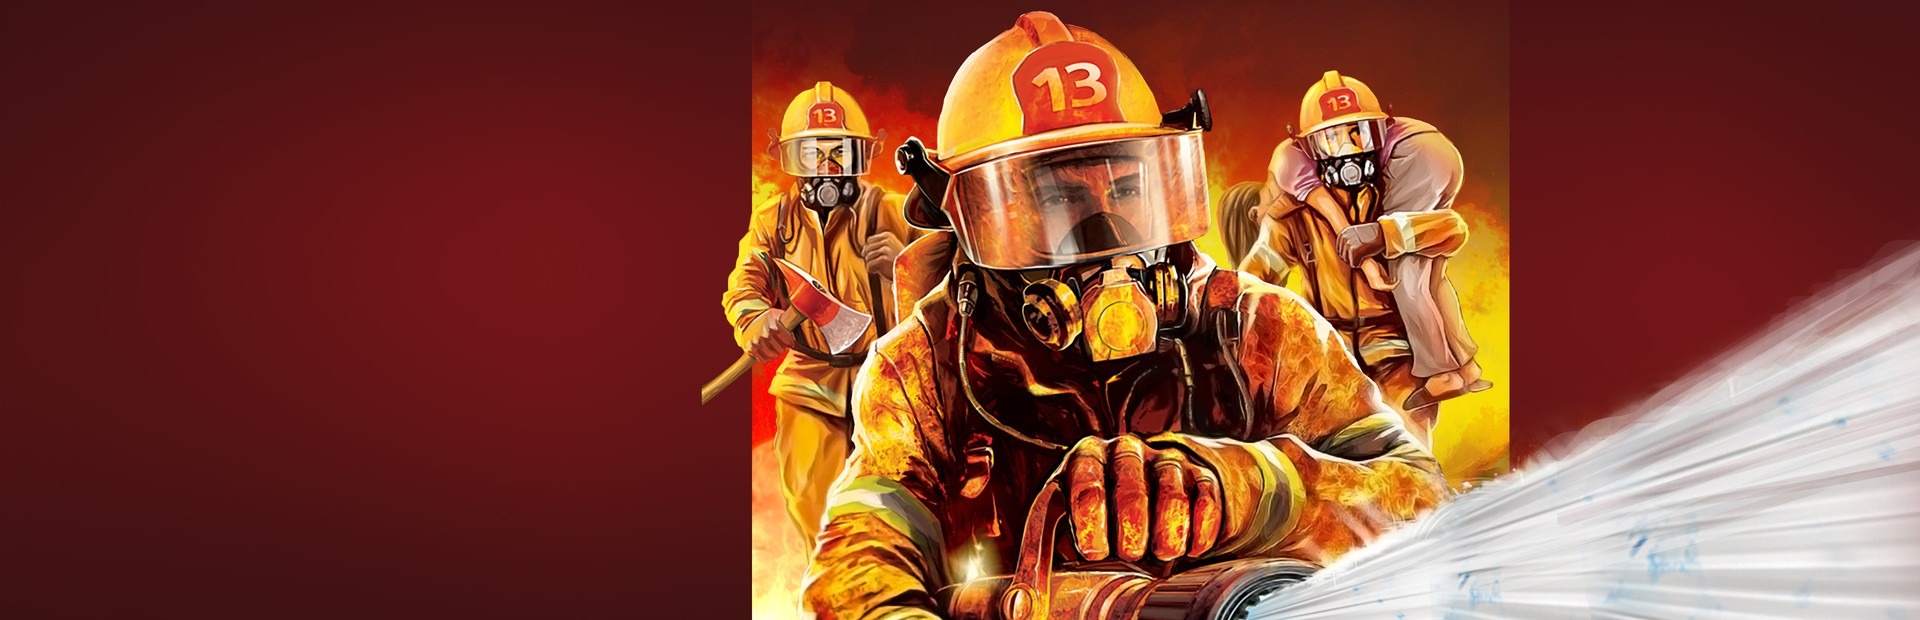 Real Heroes: Firefighter Switch